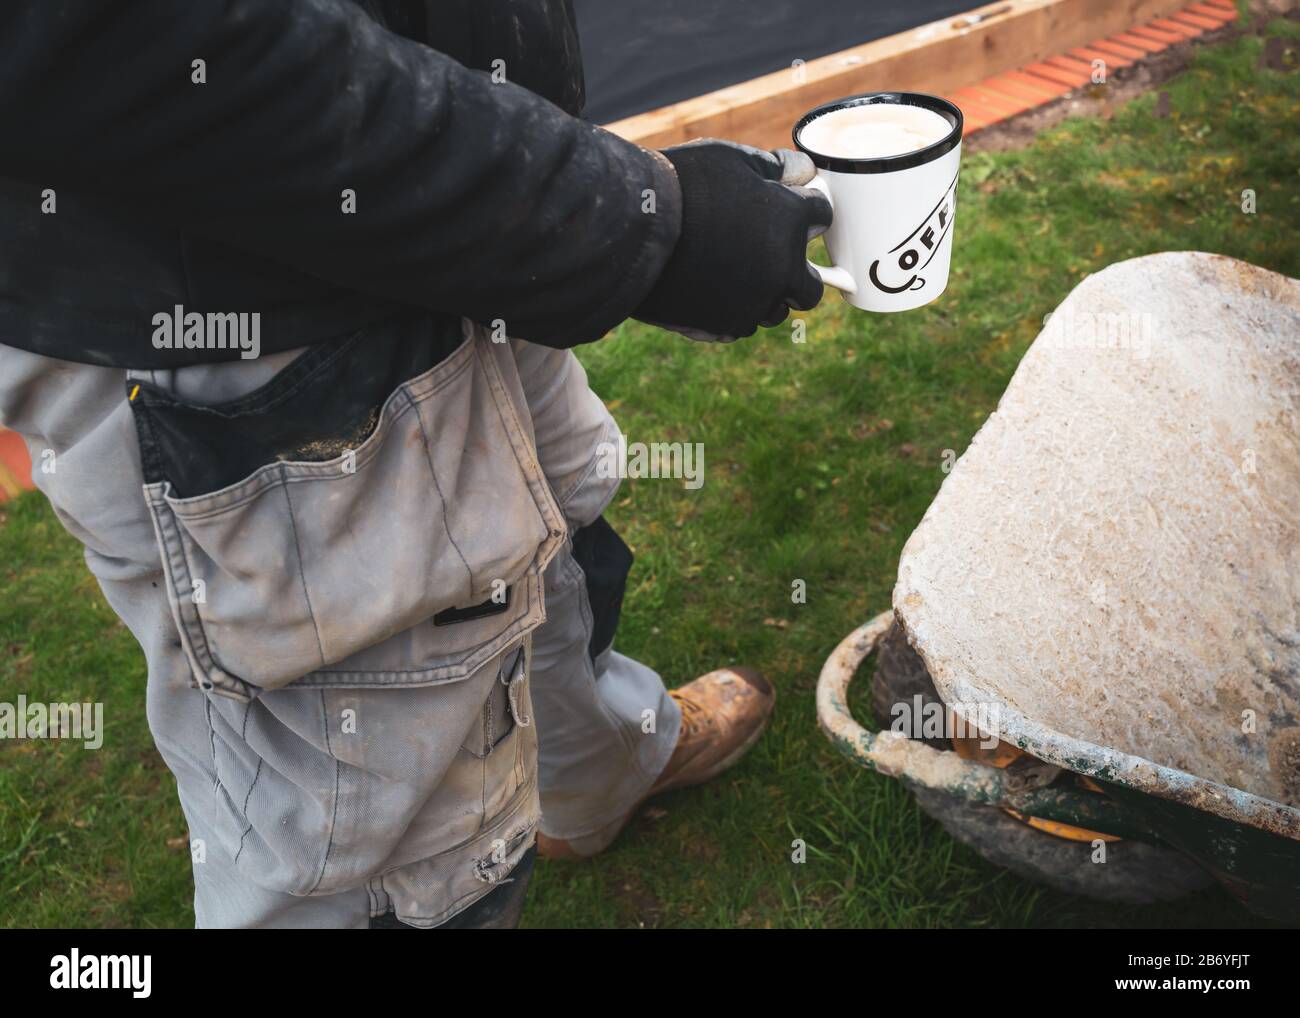 A cup of milky coffee being held by a workman in overalls by a wheelbarrow standing on grass in a garden or back yard. He is taking a break. Stock Photo